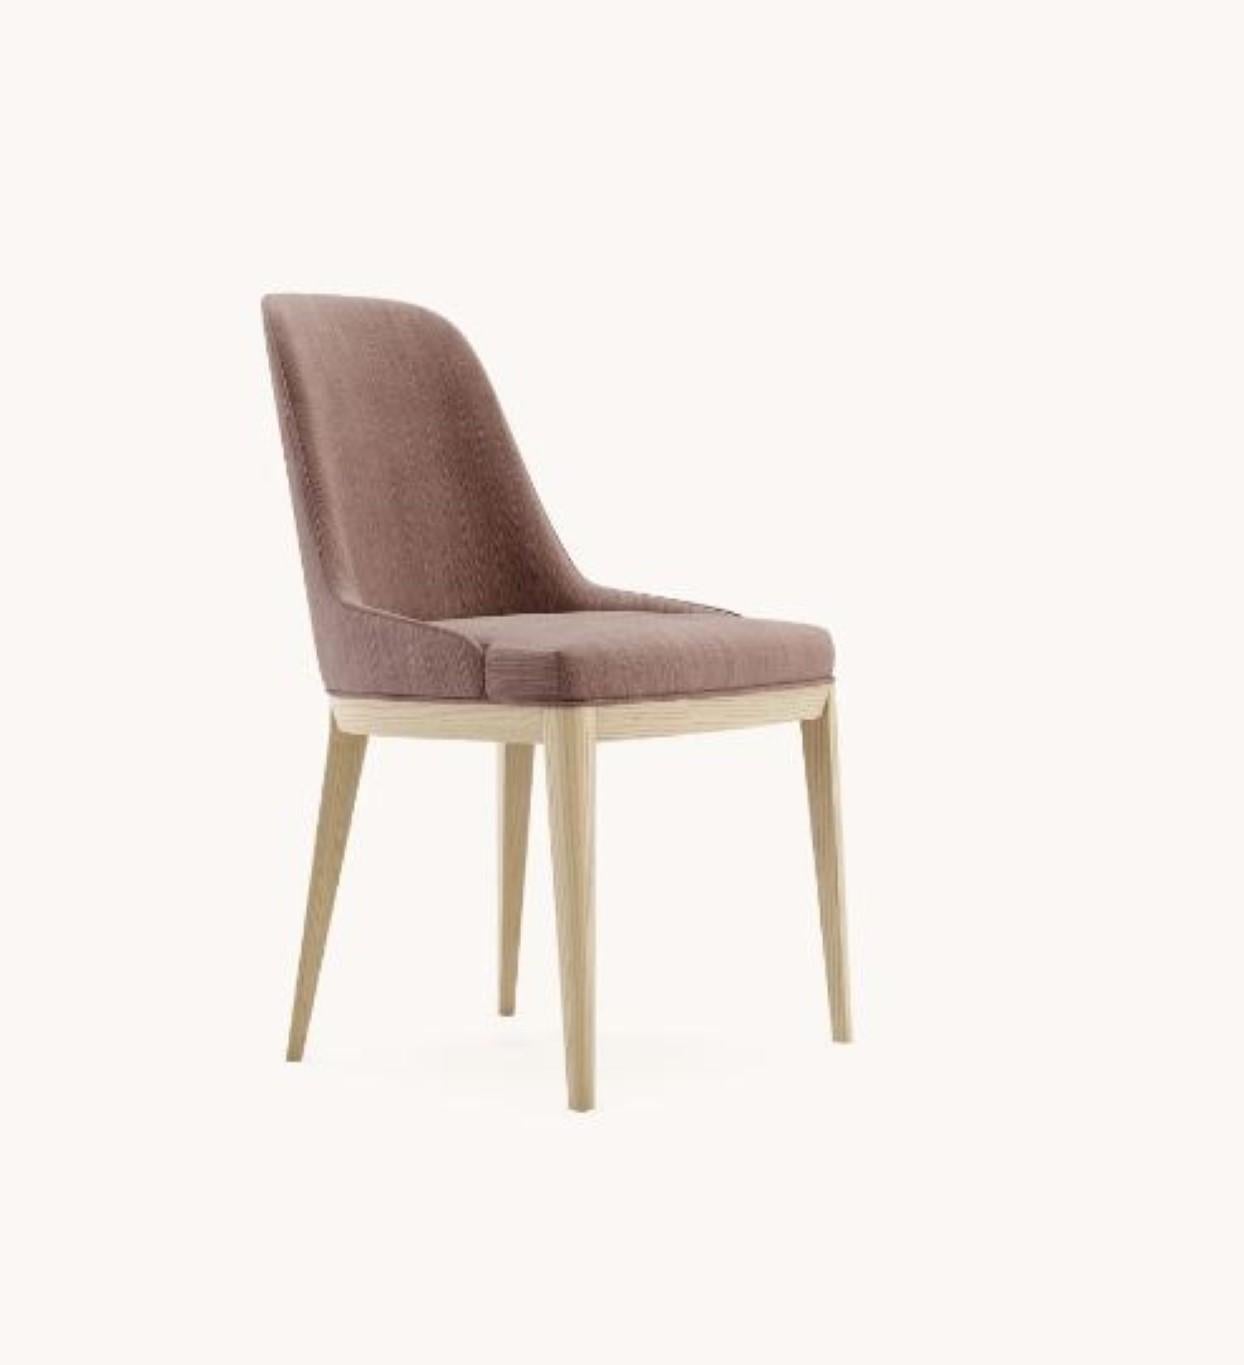 Anna Chair by Domkapa
Materials: Natural ash, Velvet.
Dimensions:  W 56 x D 57 x H 86 cm. 
Also available in different materials. Please contact us.

This timeless chair design is the result of a mature awareness process inspired by different ideas